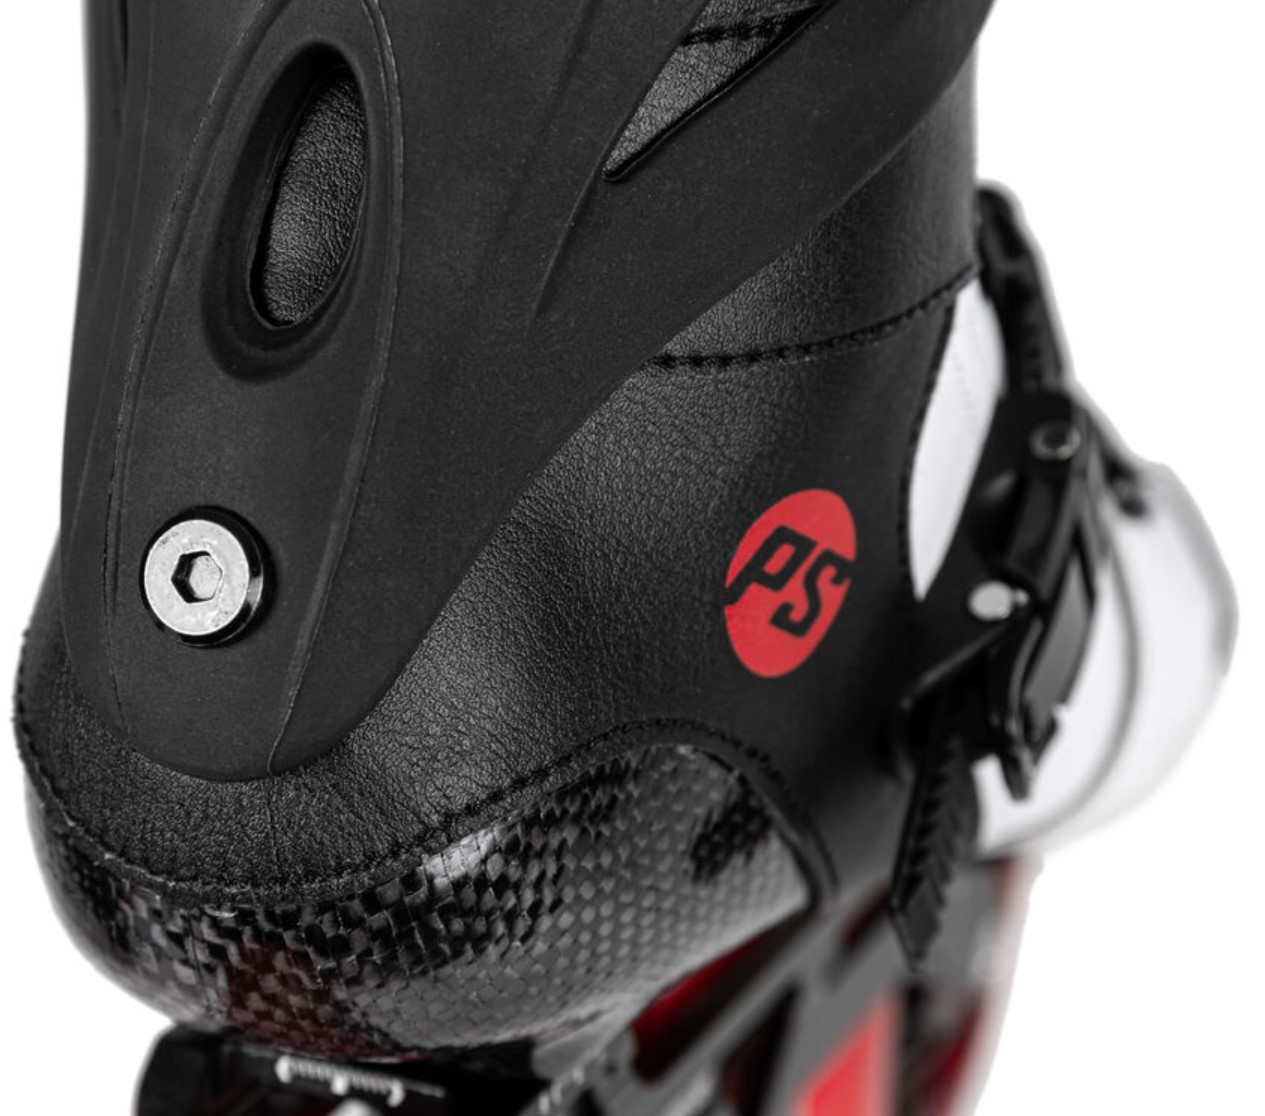 The cuff can be taken off of the Powerslide Speed Slalom Arise SL inline skate